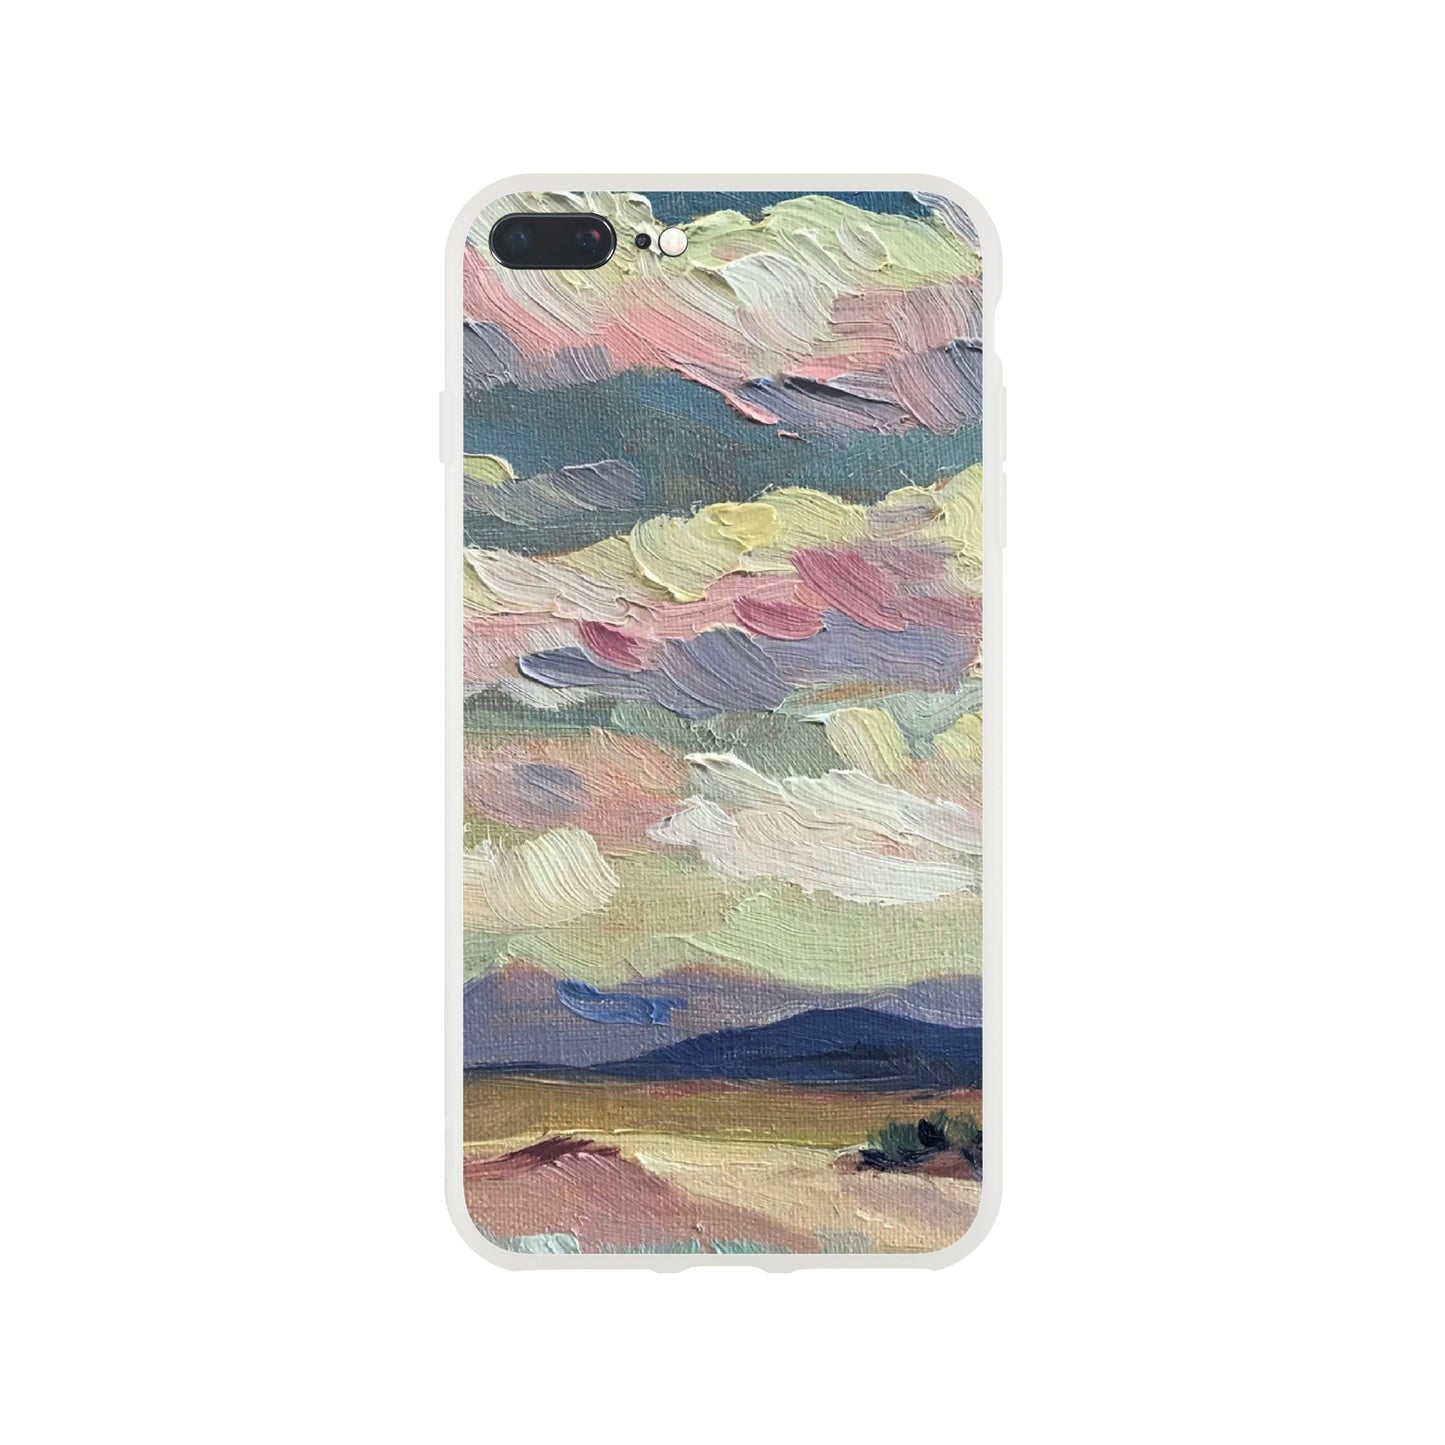 "Rio Chama" Flexi Phone Case for Iphone or Samsung by Barbara Cleary Designs